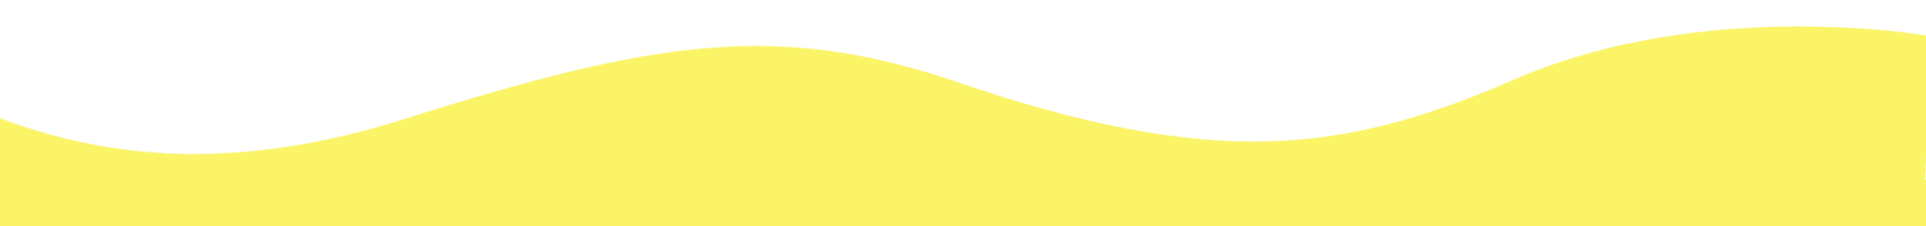 A simple graphic showing a smooth, wavy line in yellow against a dark green background.